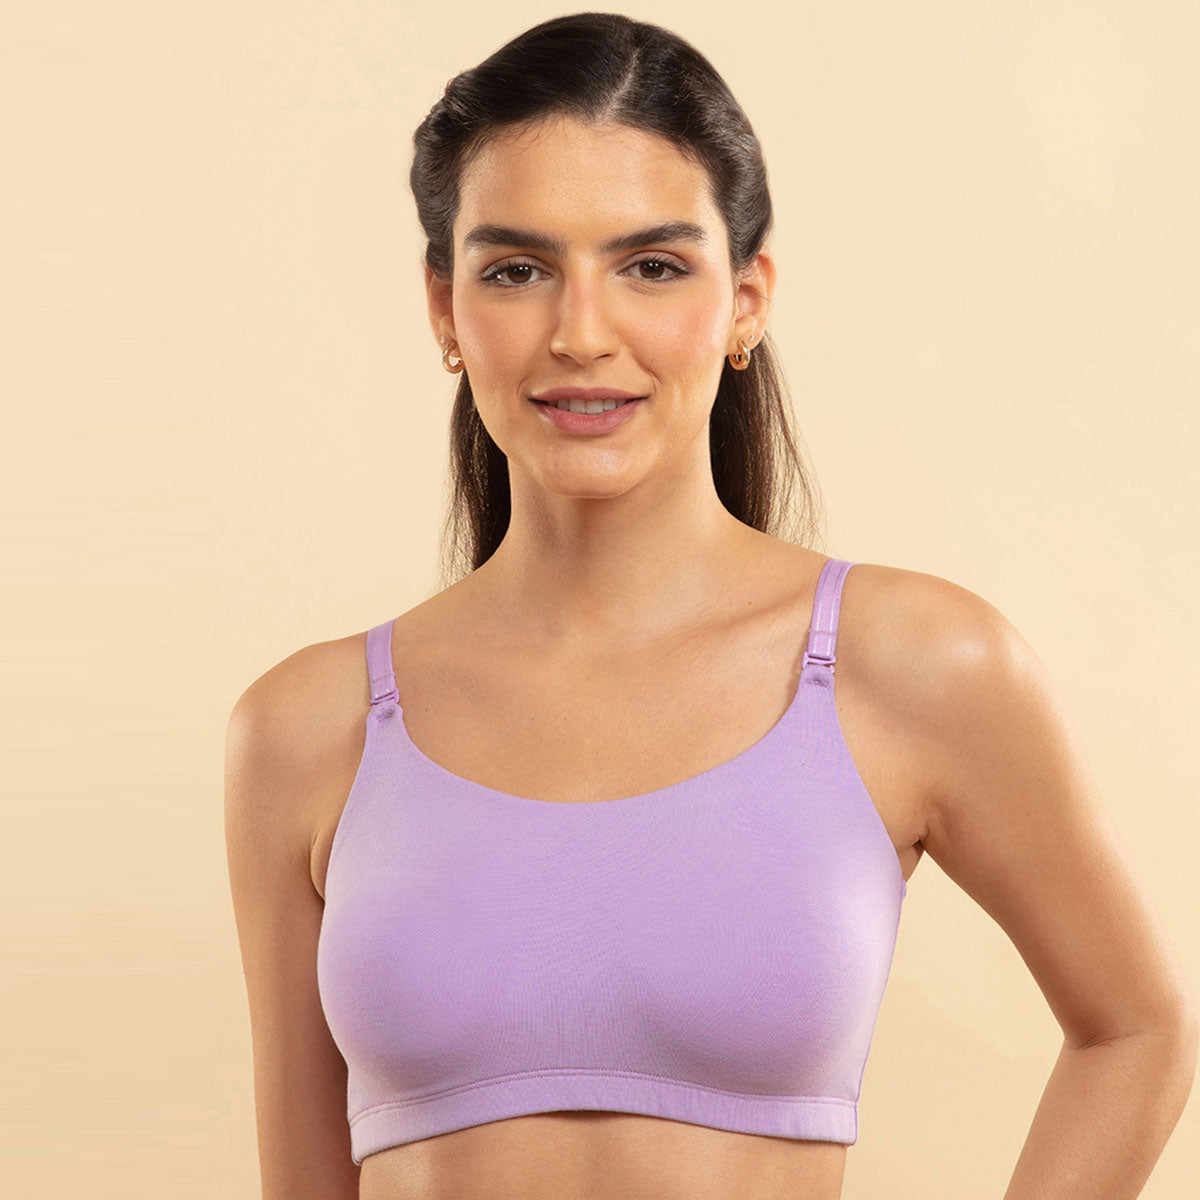 Nykd by Nykaa Easy Breezy Slip on Bra PO2 NYB165 Pink and Lavender